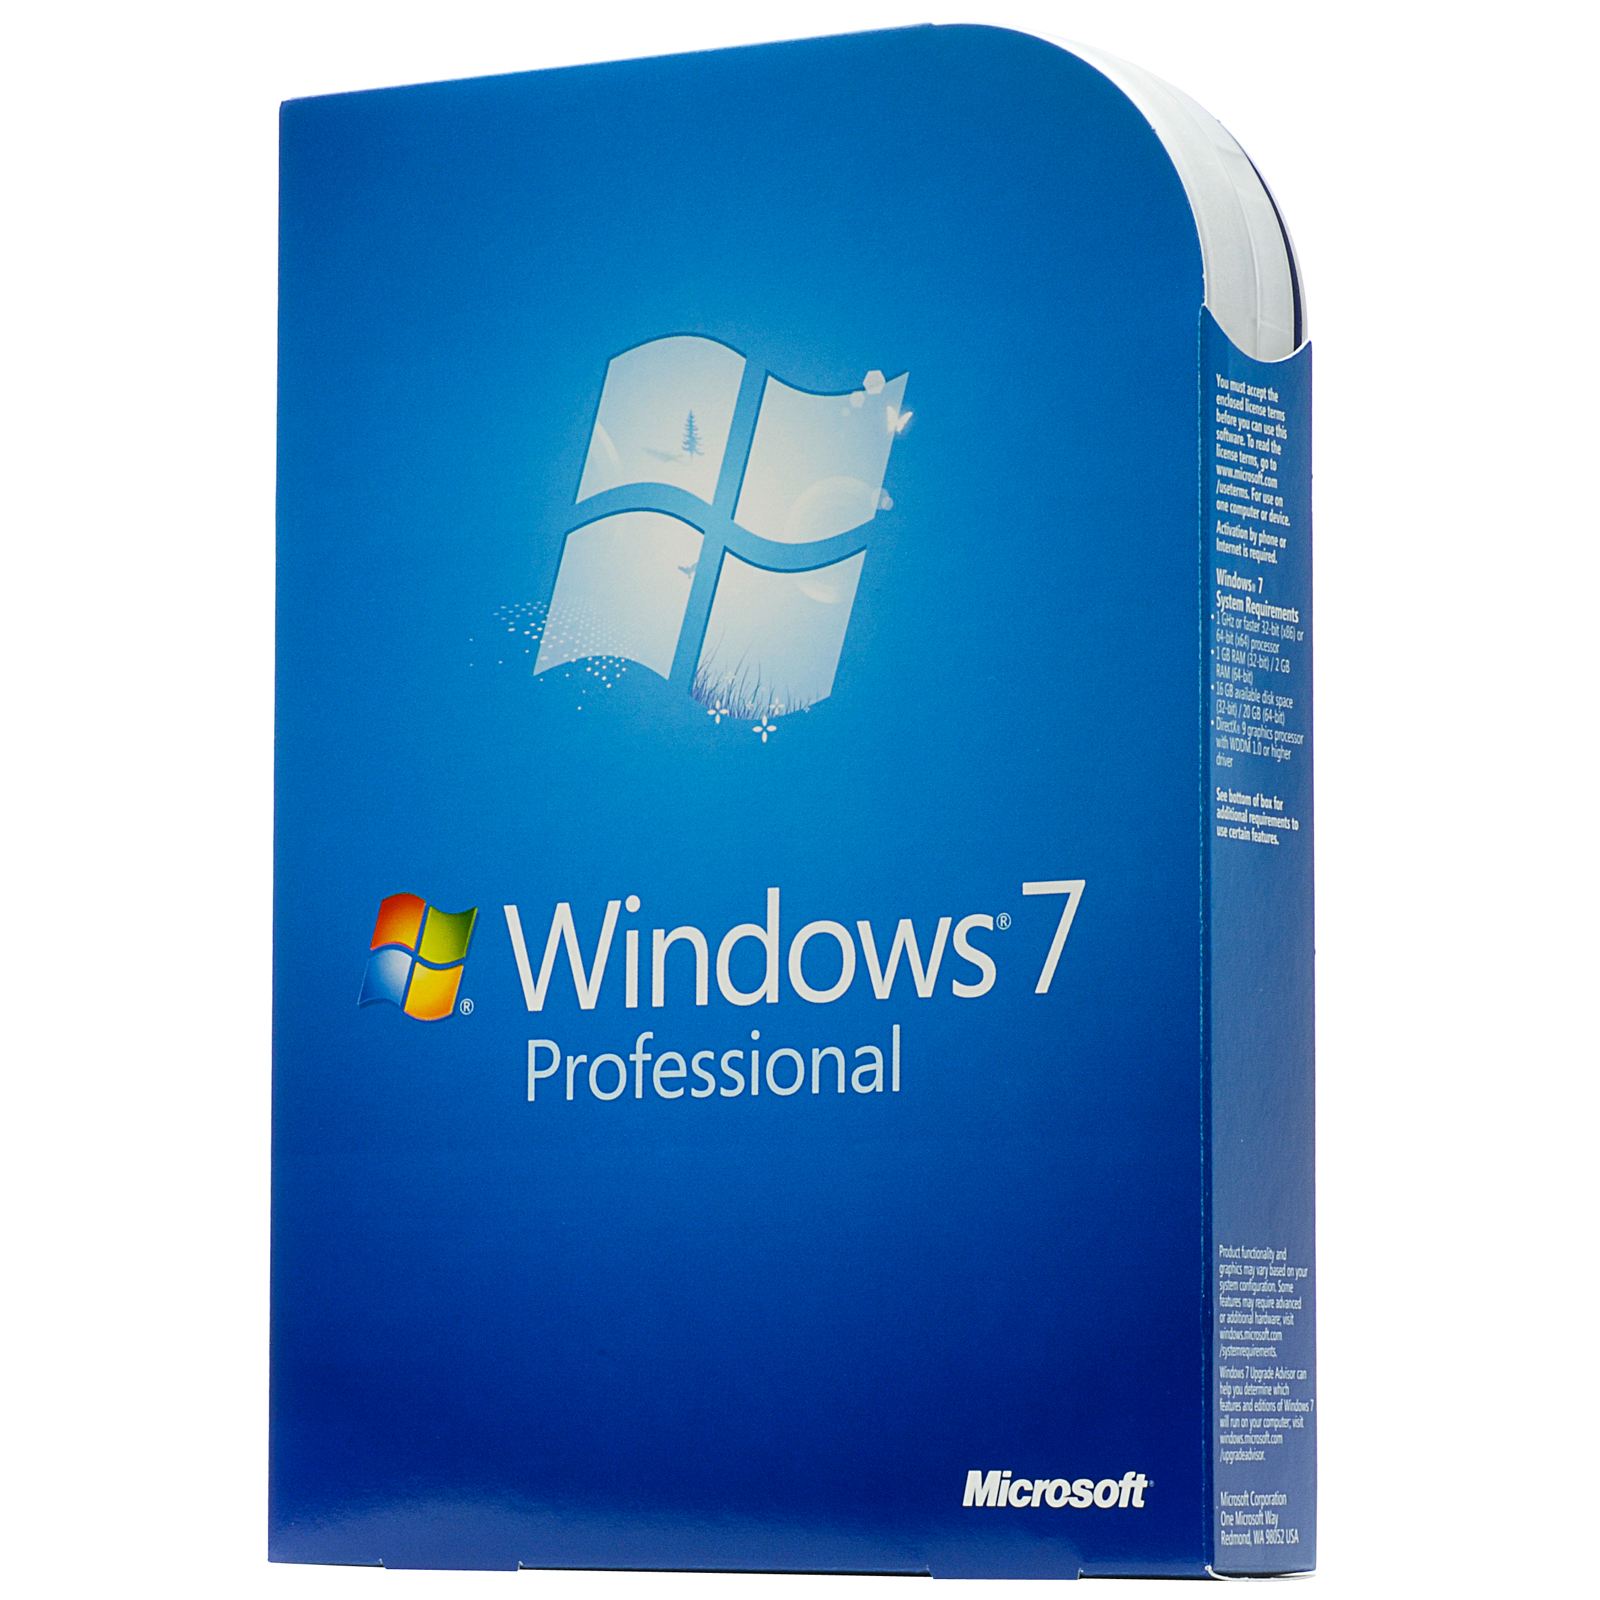 How Large Is Windows 7 Pro Iso Download?